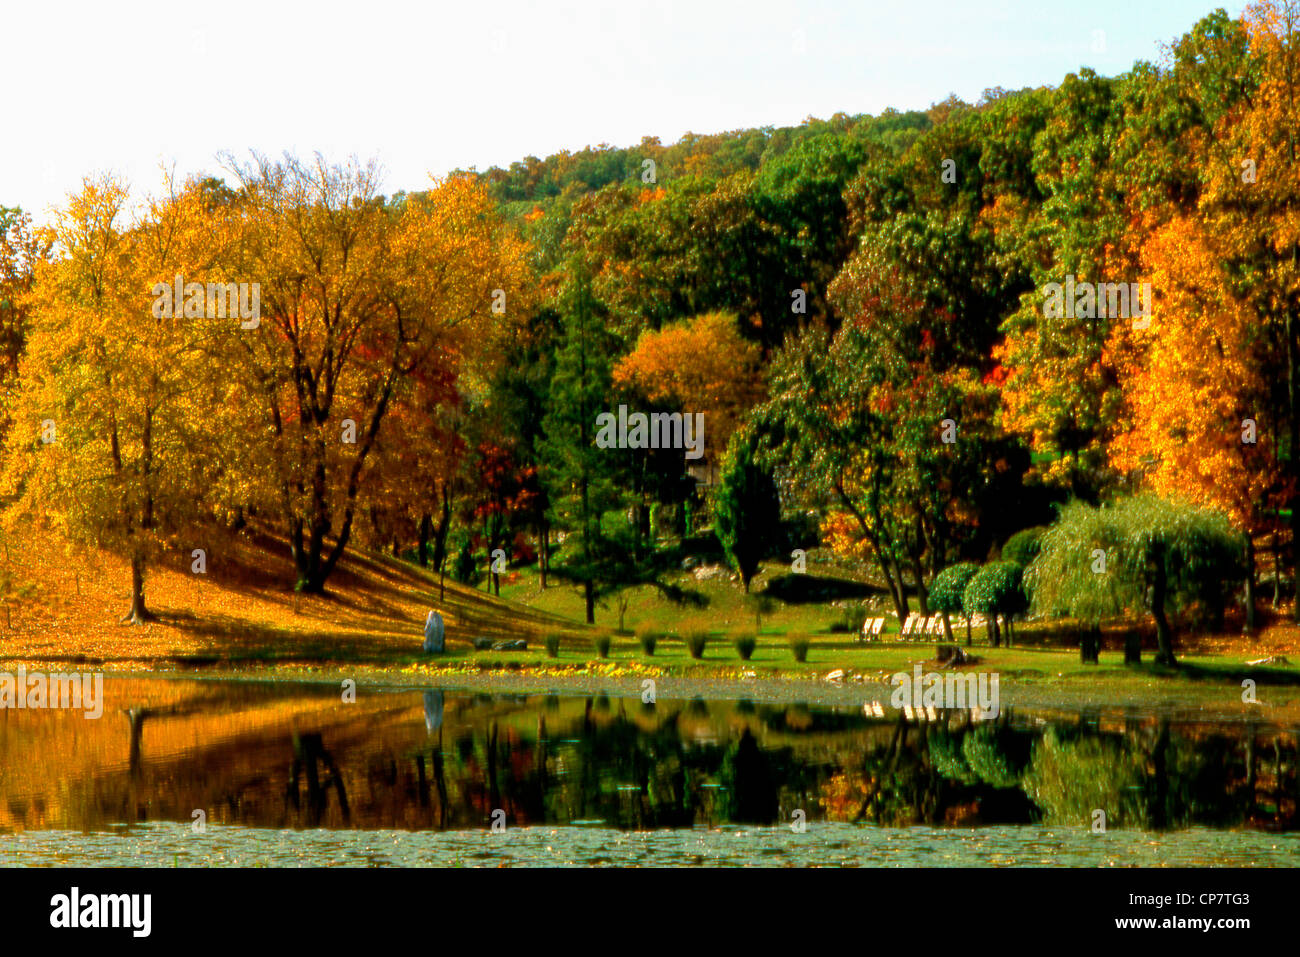 Image of Autumn colors and lake reflections at Innisfree Gardens, Millbrook, New York, USA Stock Photo